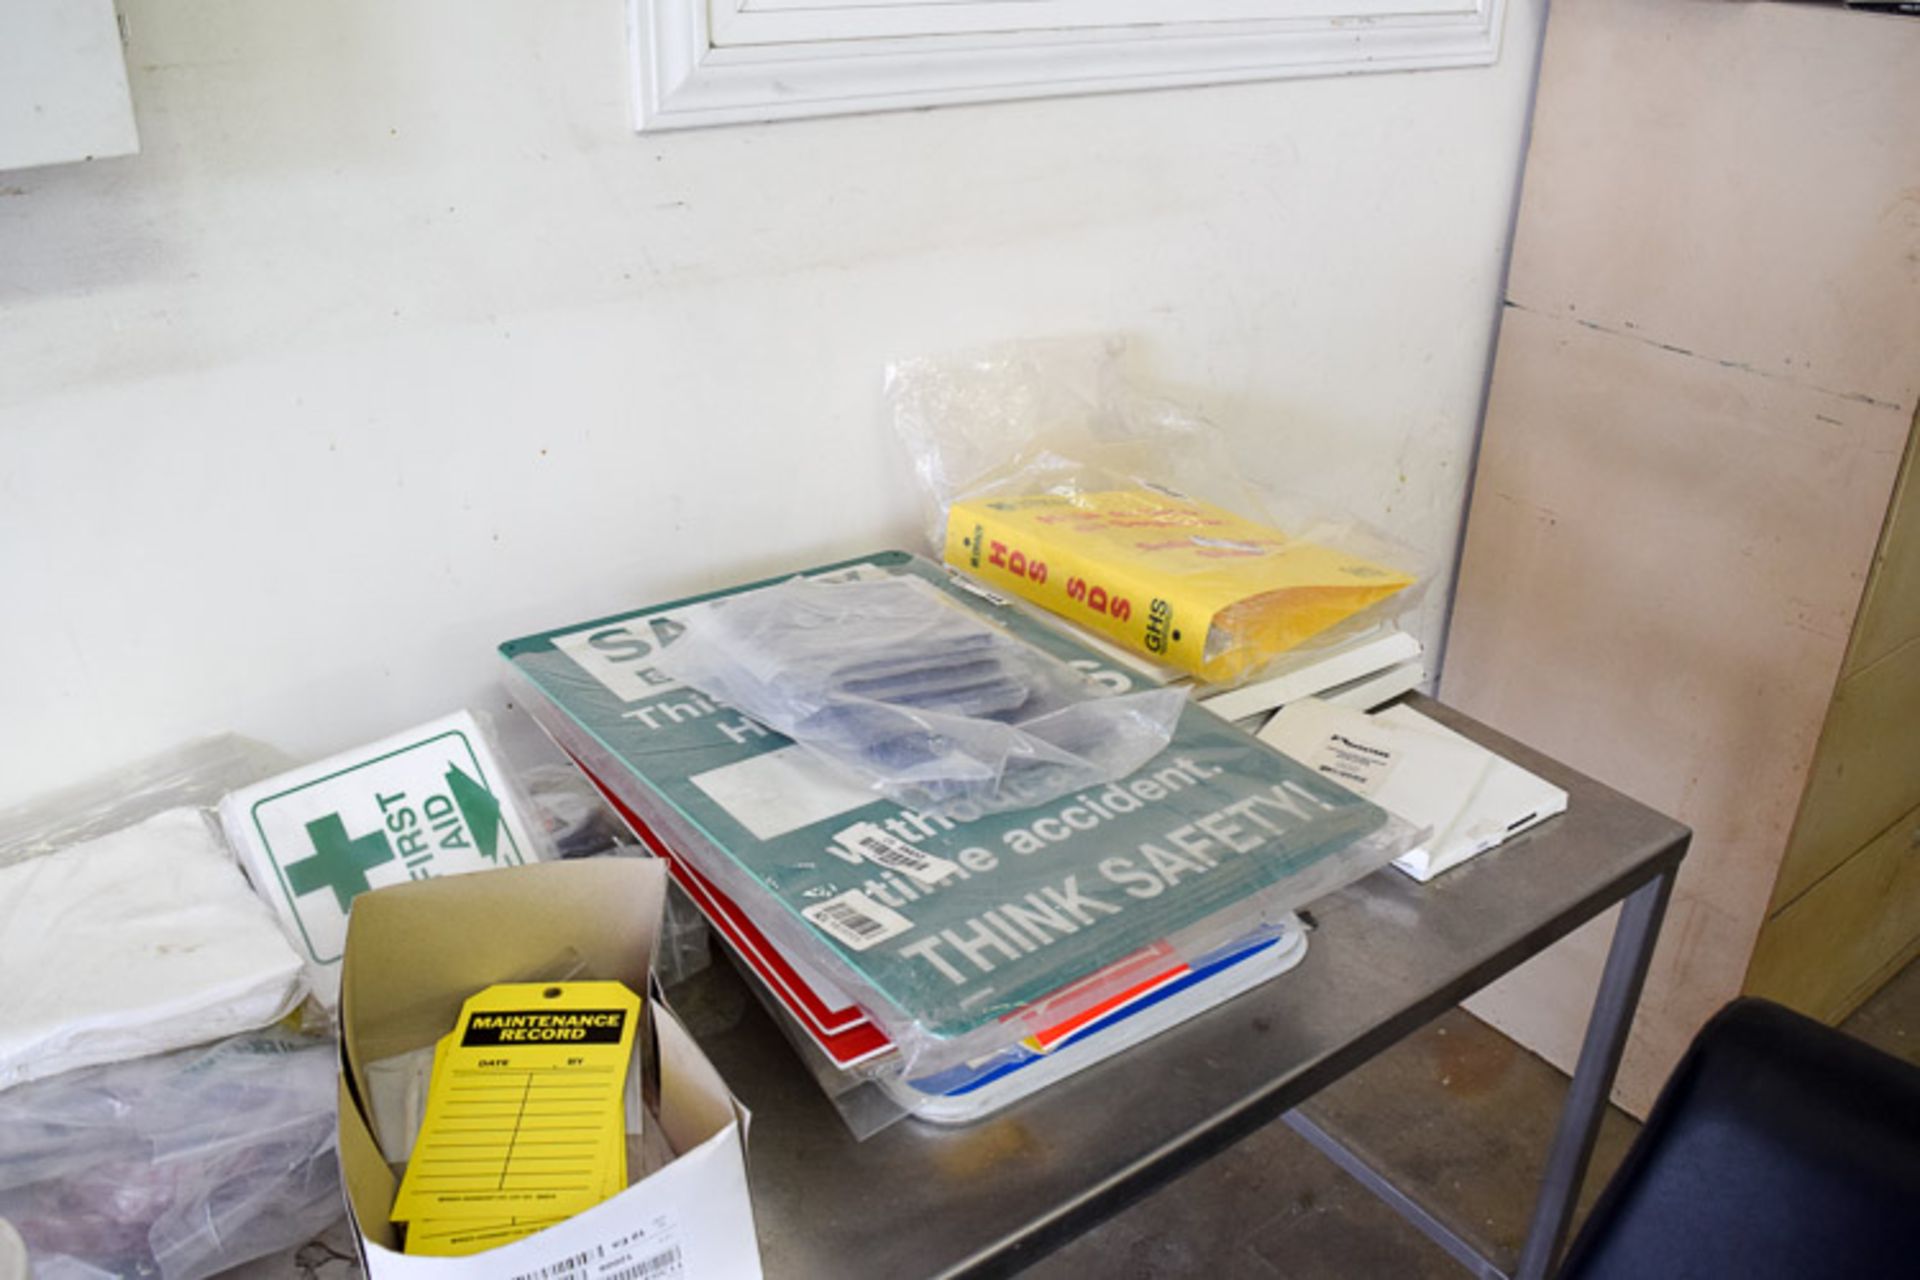 Safety Signs and S/S Table - Rigging Fee $ 25